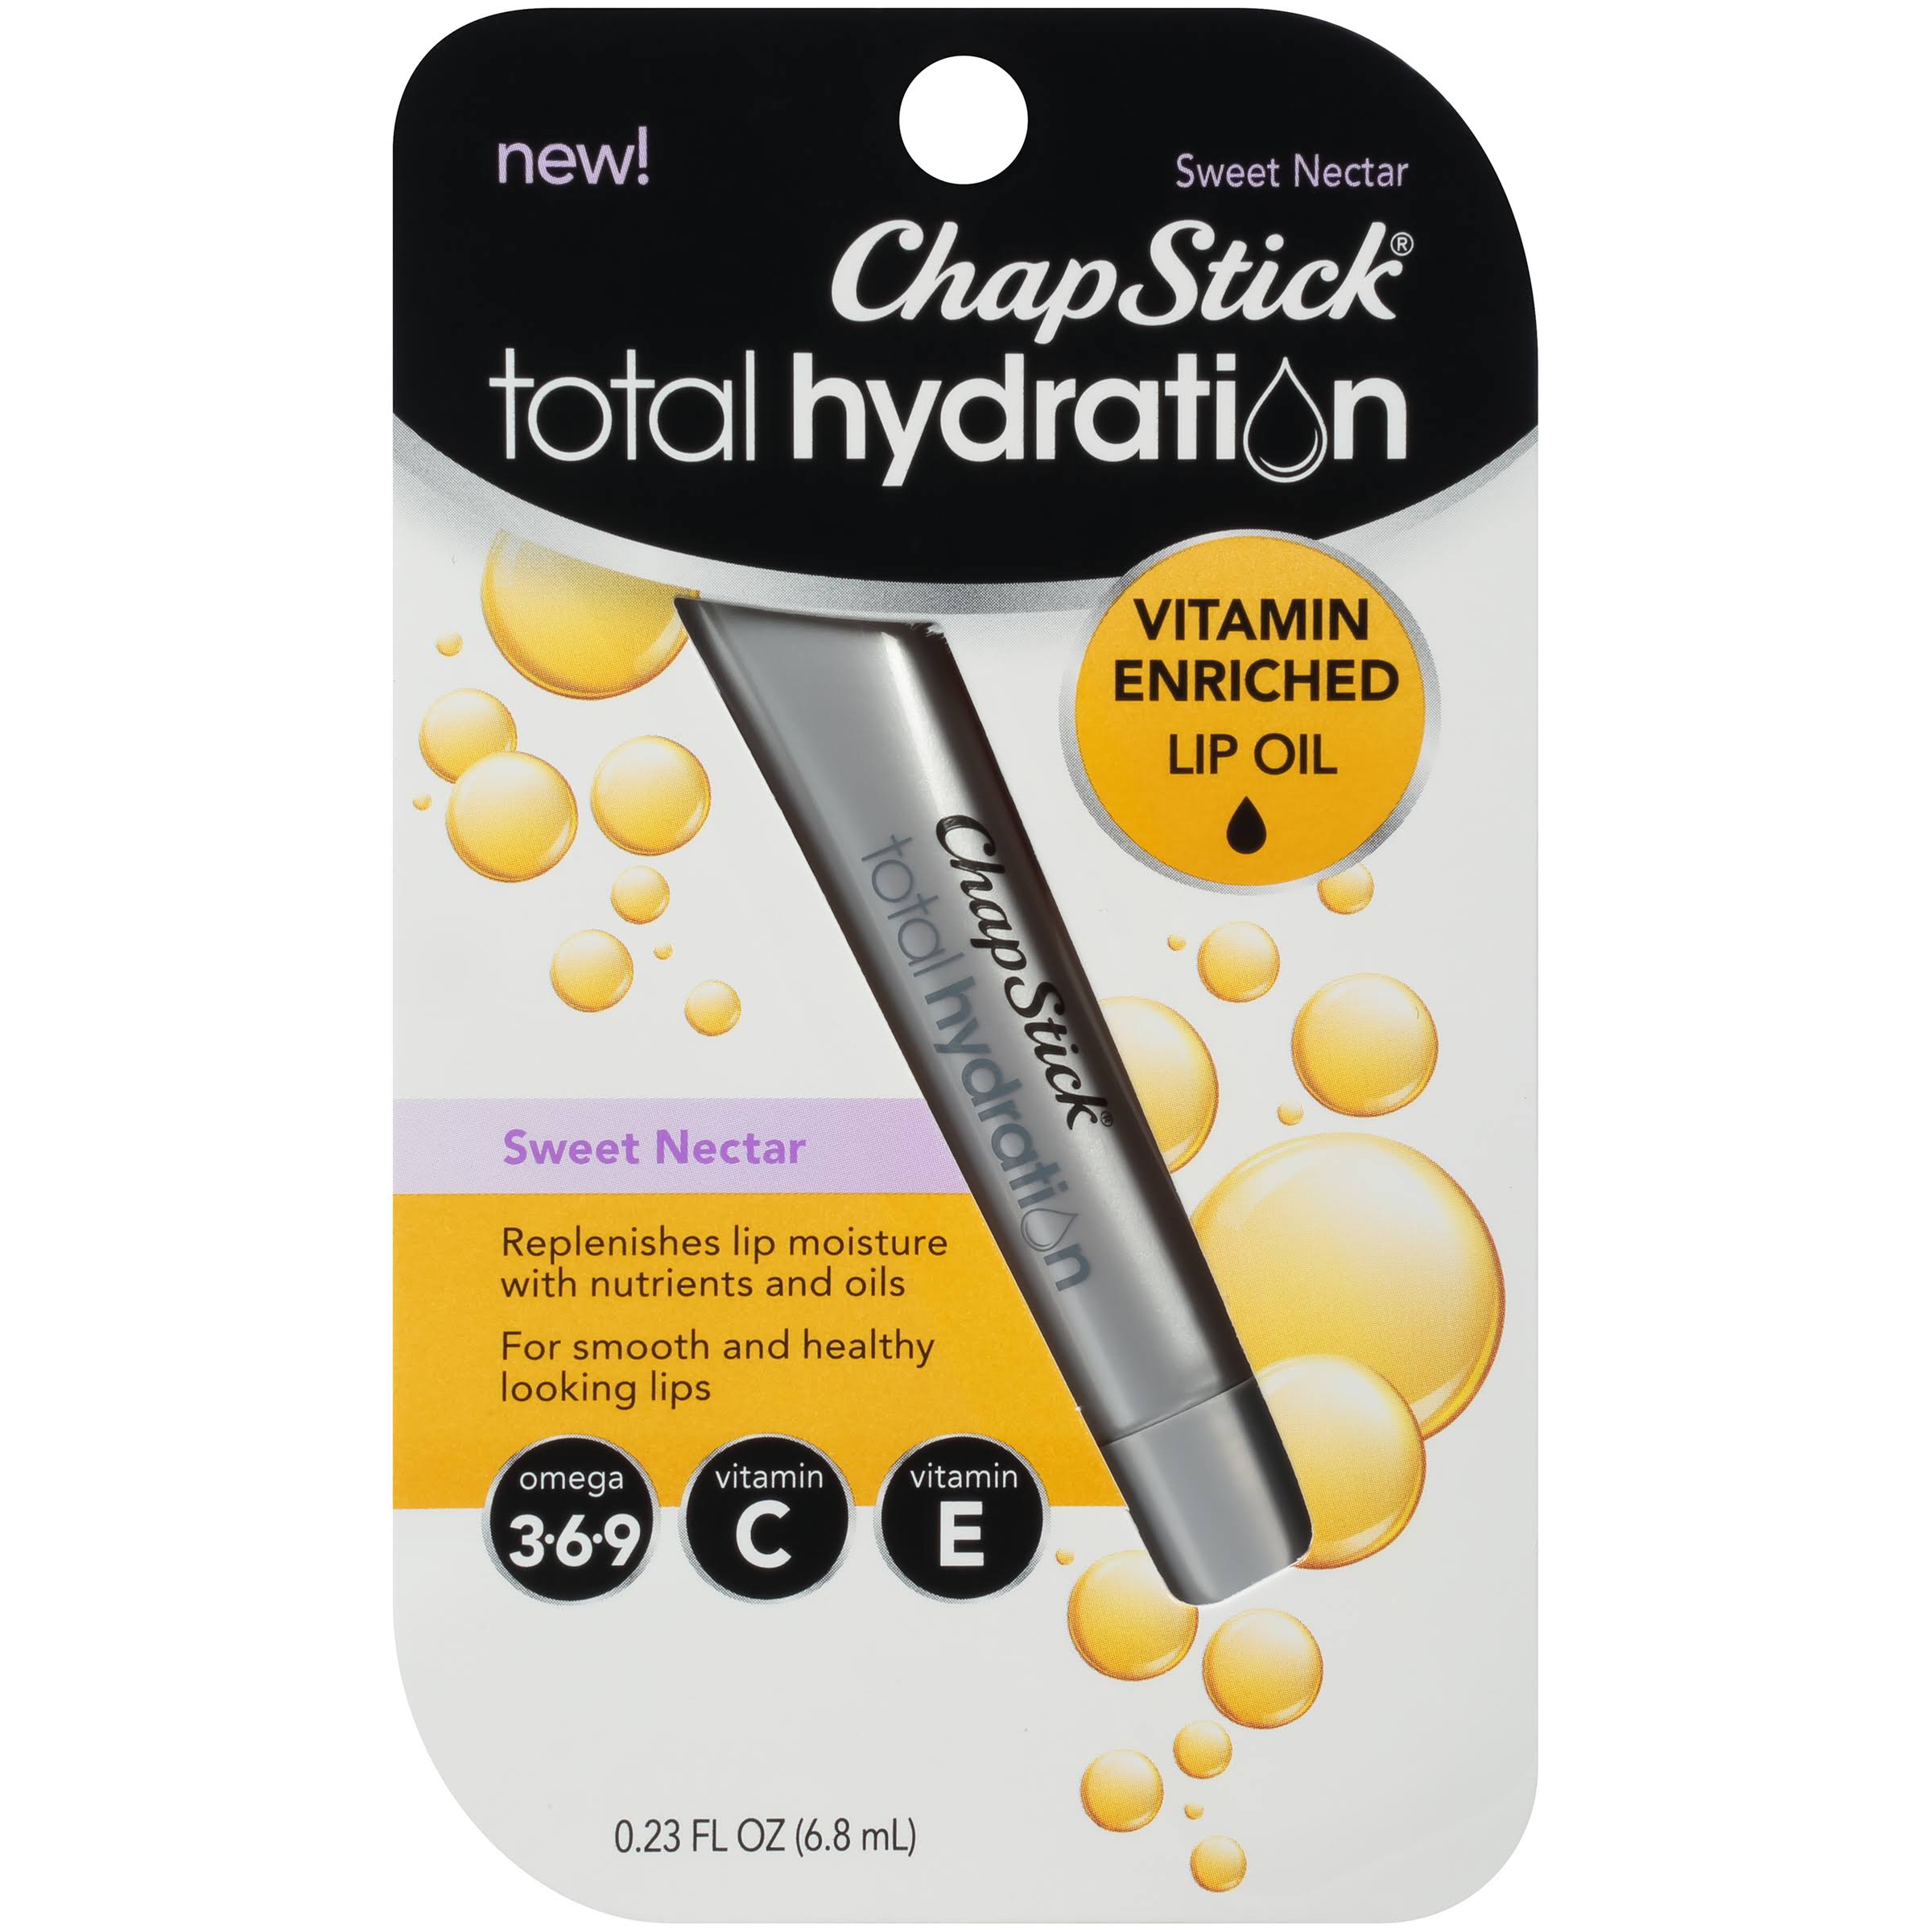 Chapstick Total Hydration Vitamin Enriched Lip Oil - Sweet Nectar Flavor